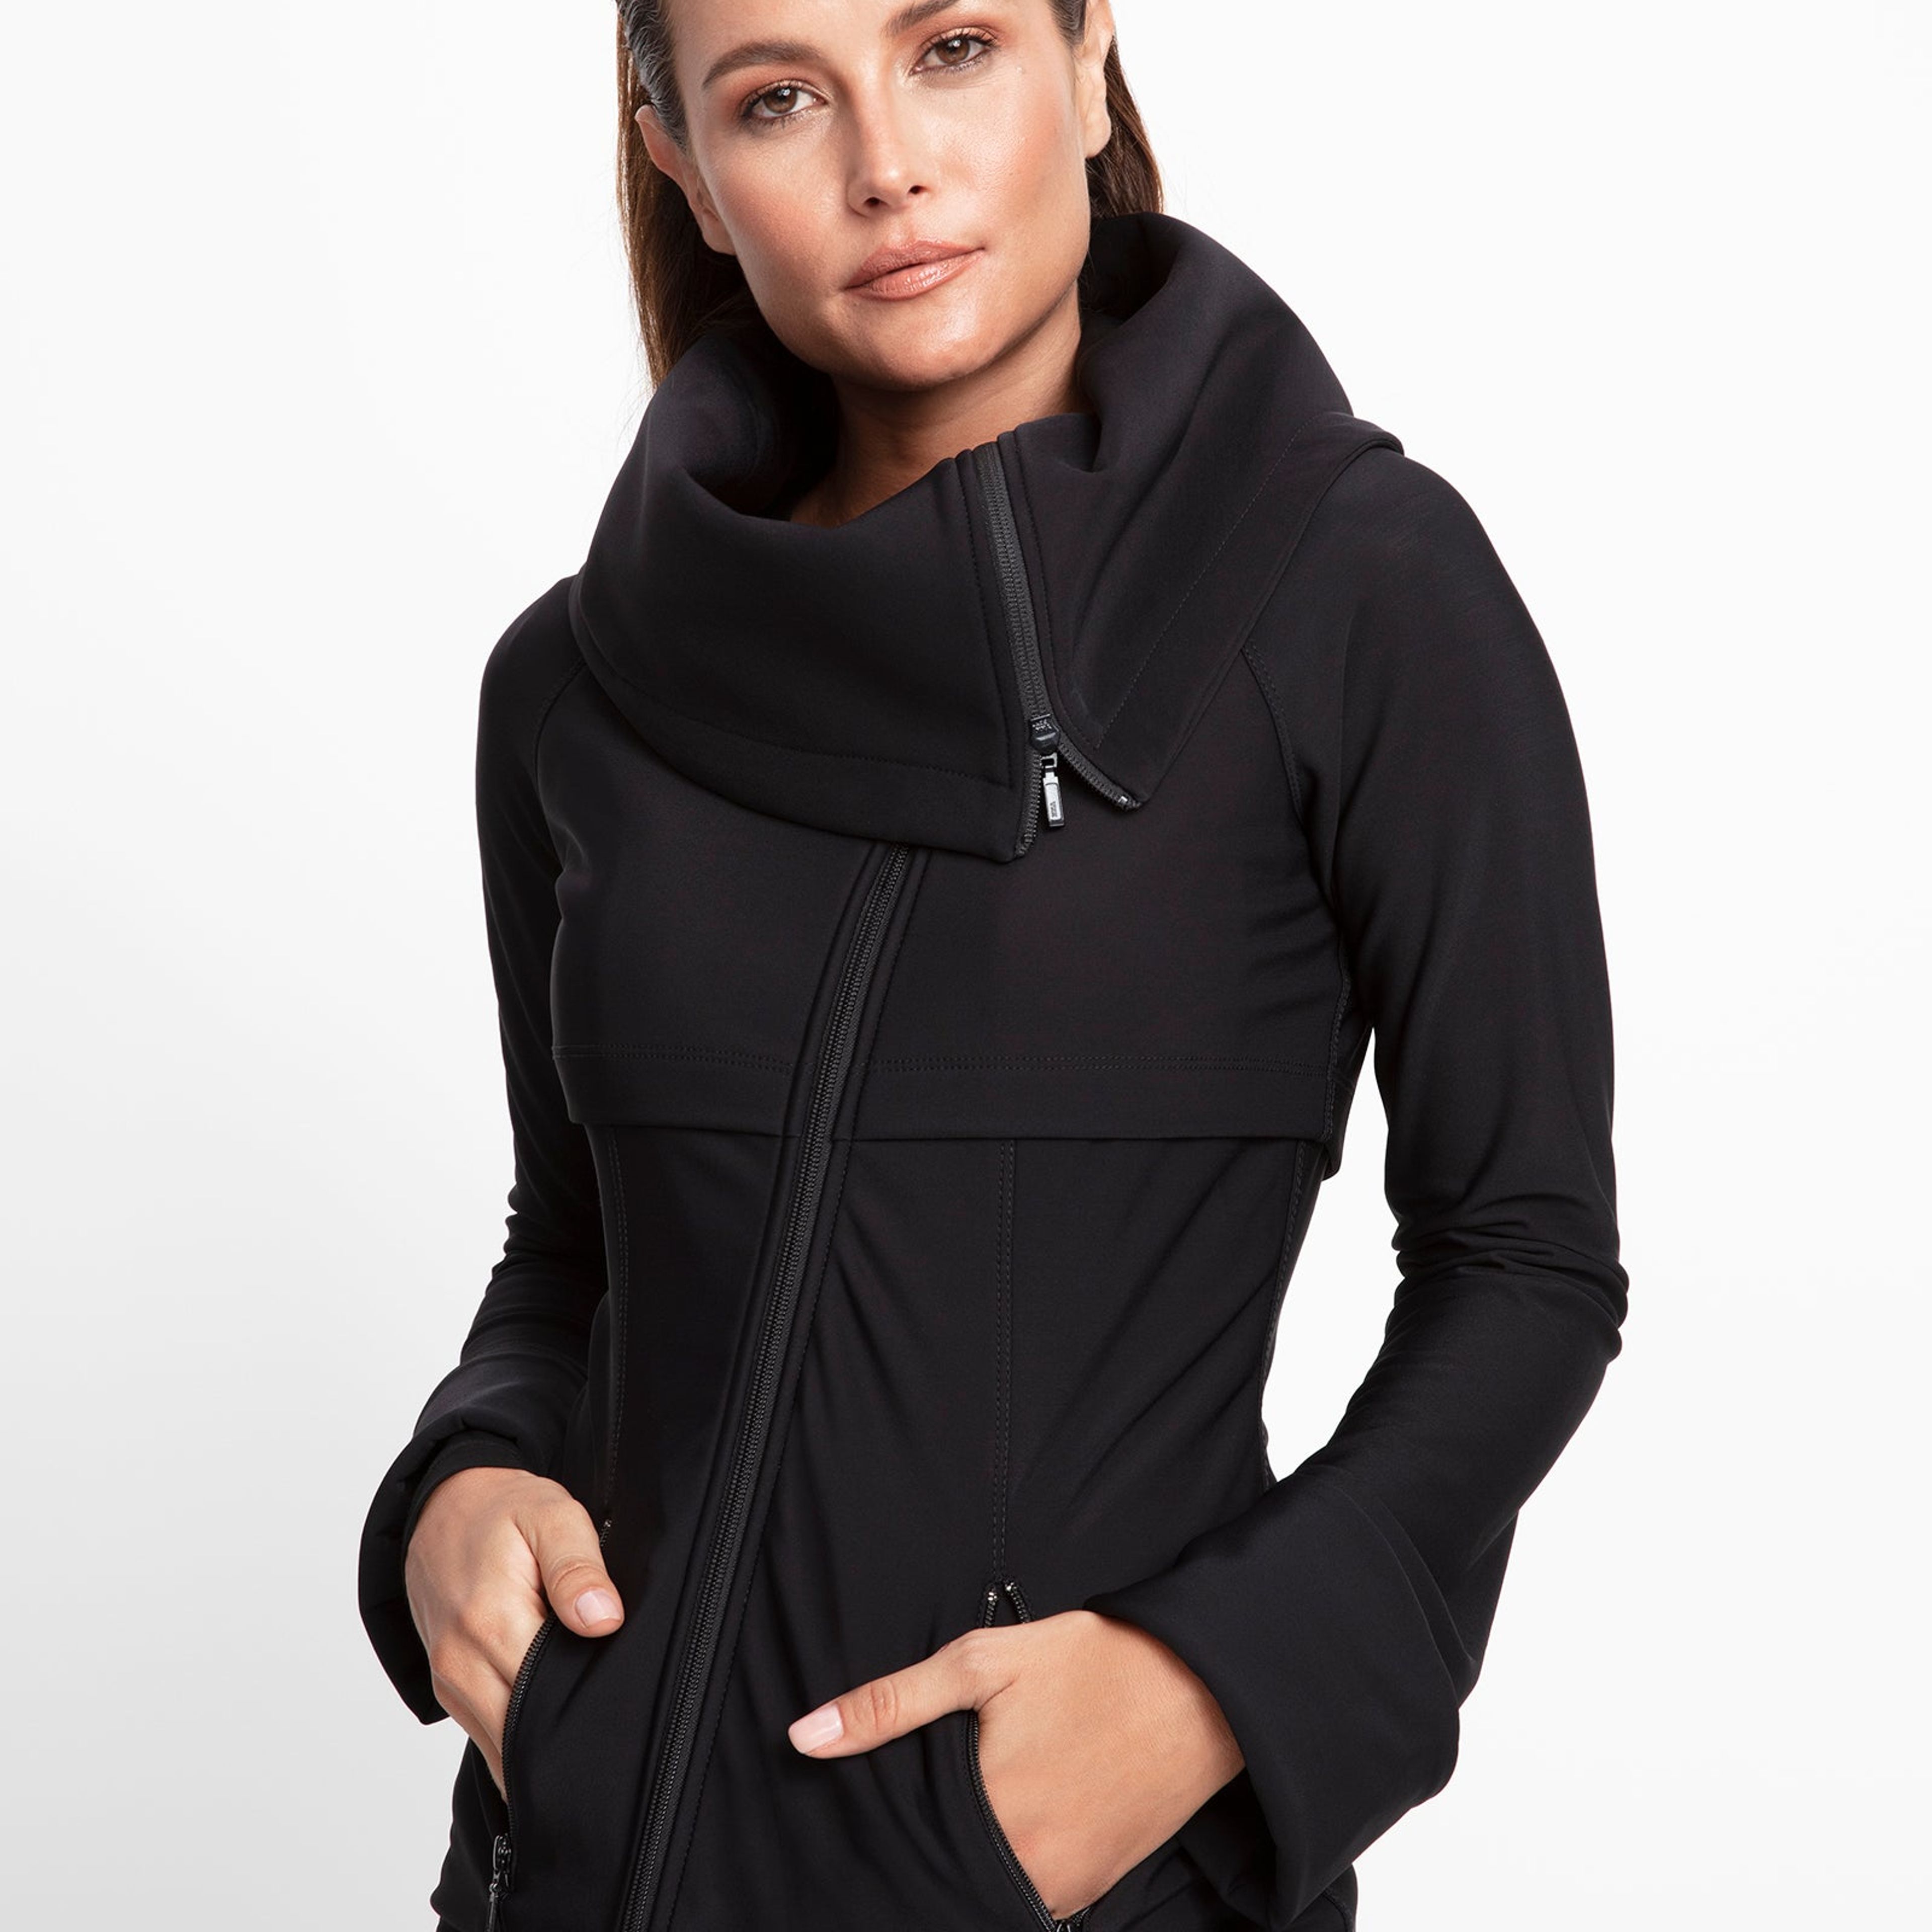 Fall in love with these Butterluxe Waist-Length Full Zip Jackets